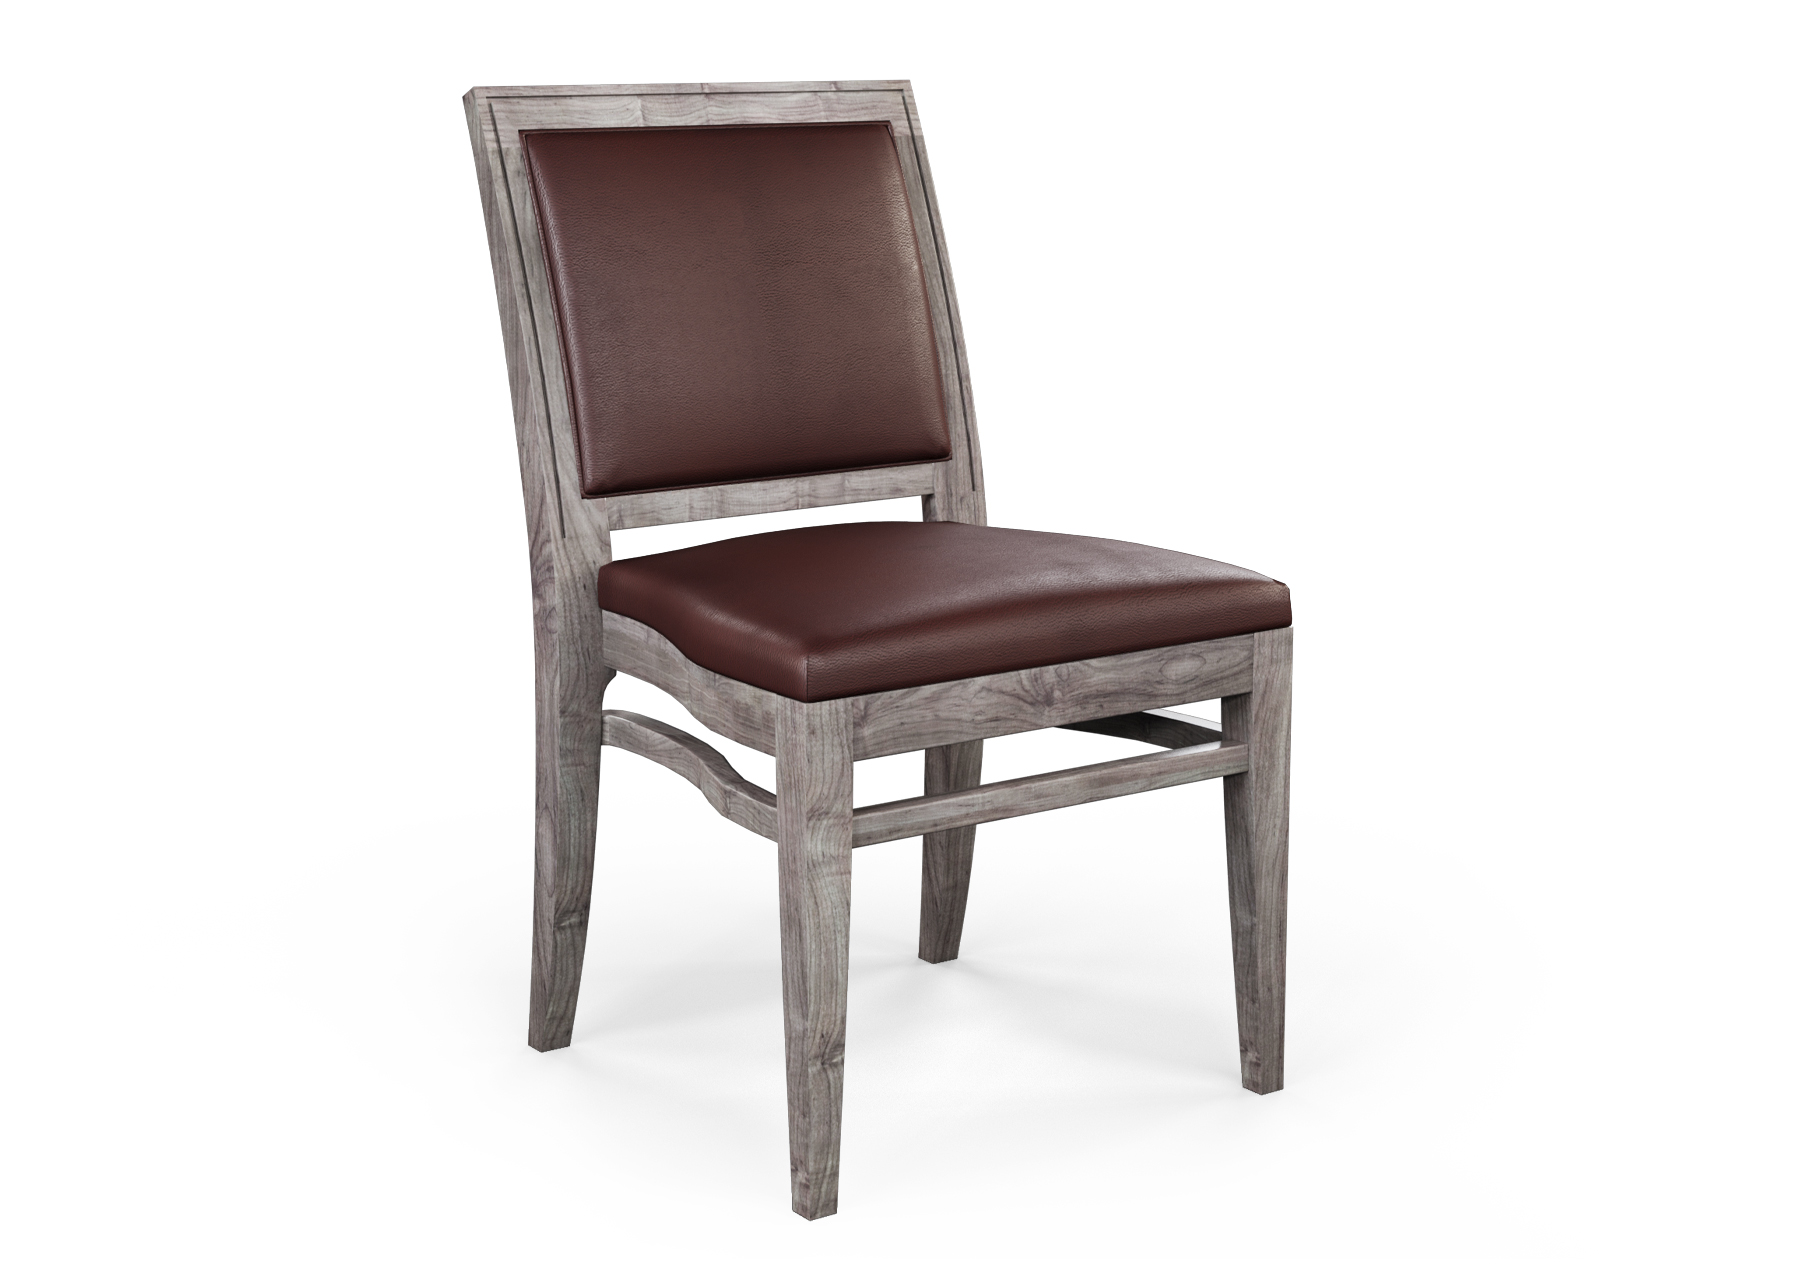  VOYAGE STACKING SIDE CHAIR